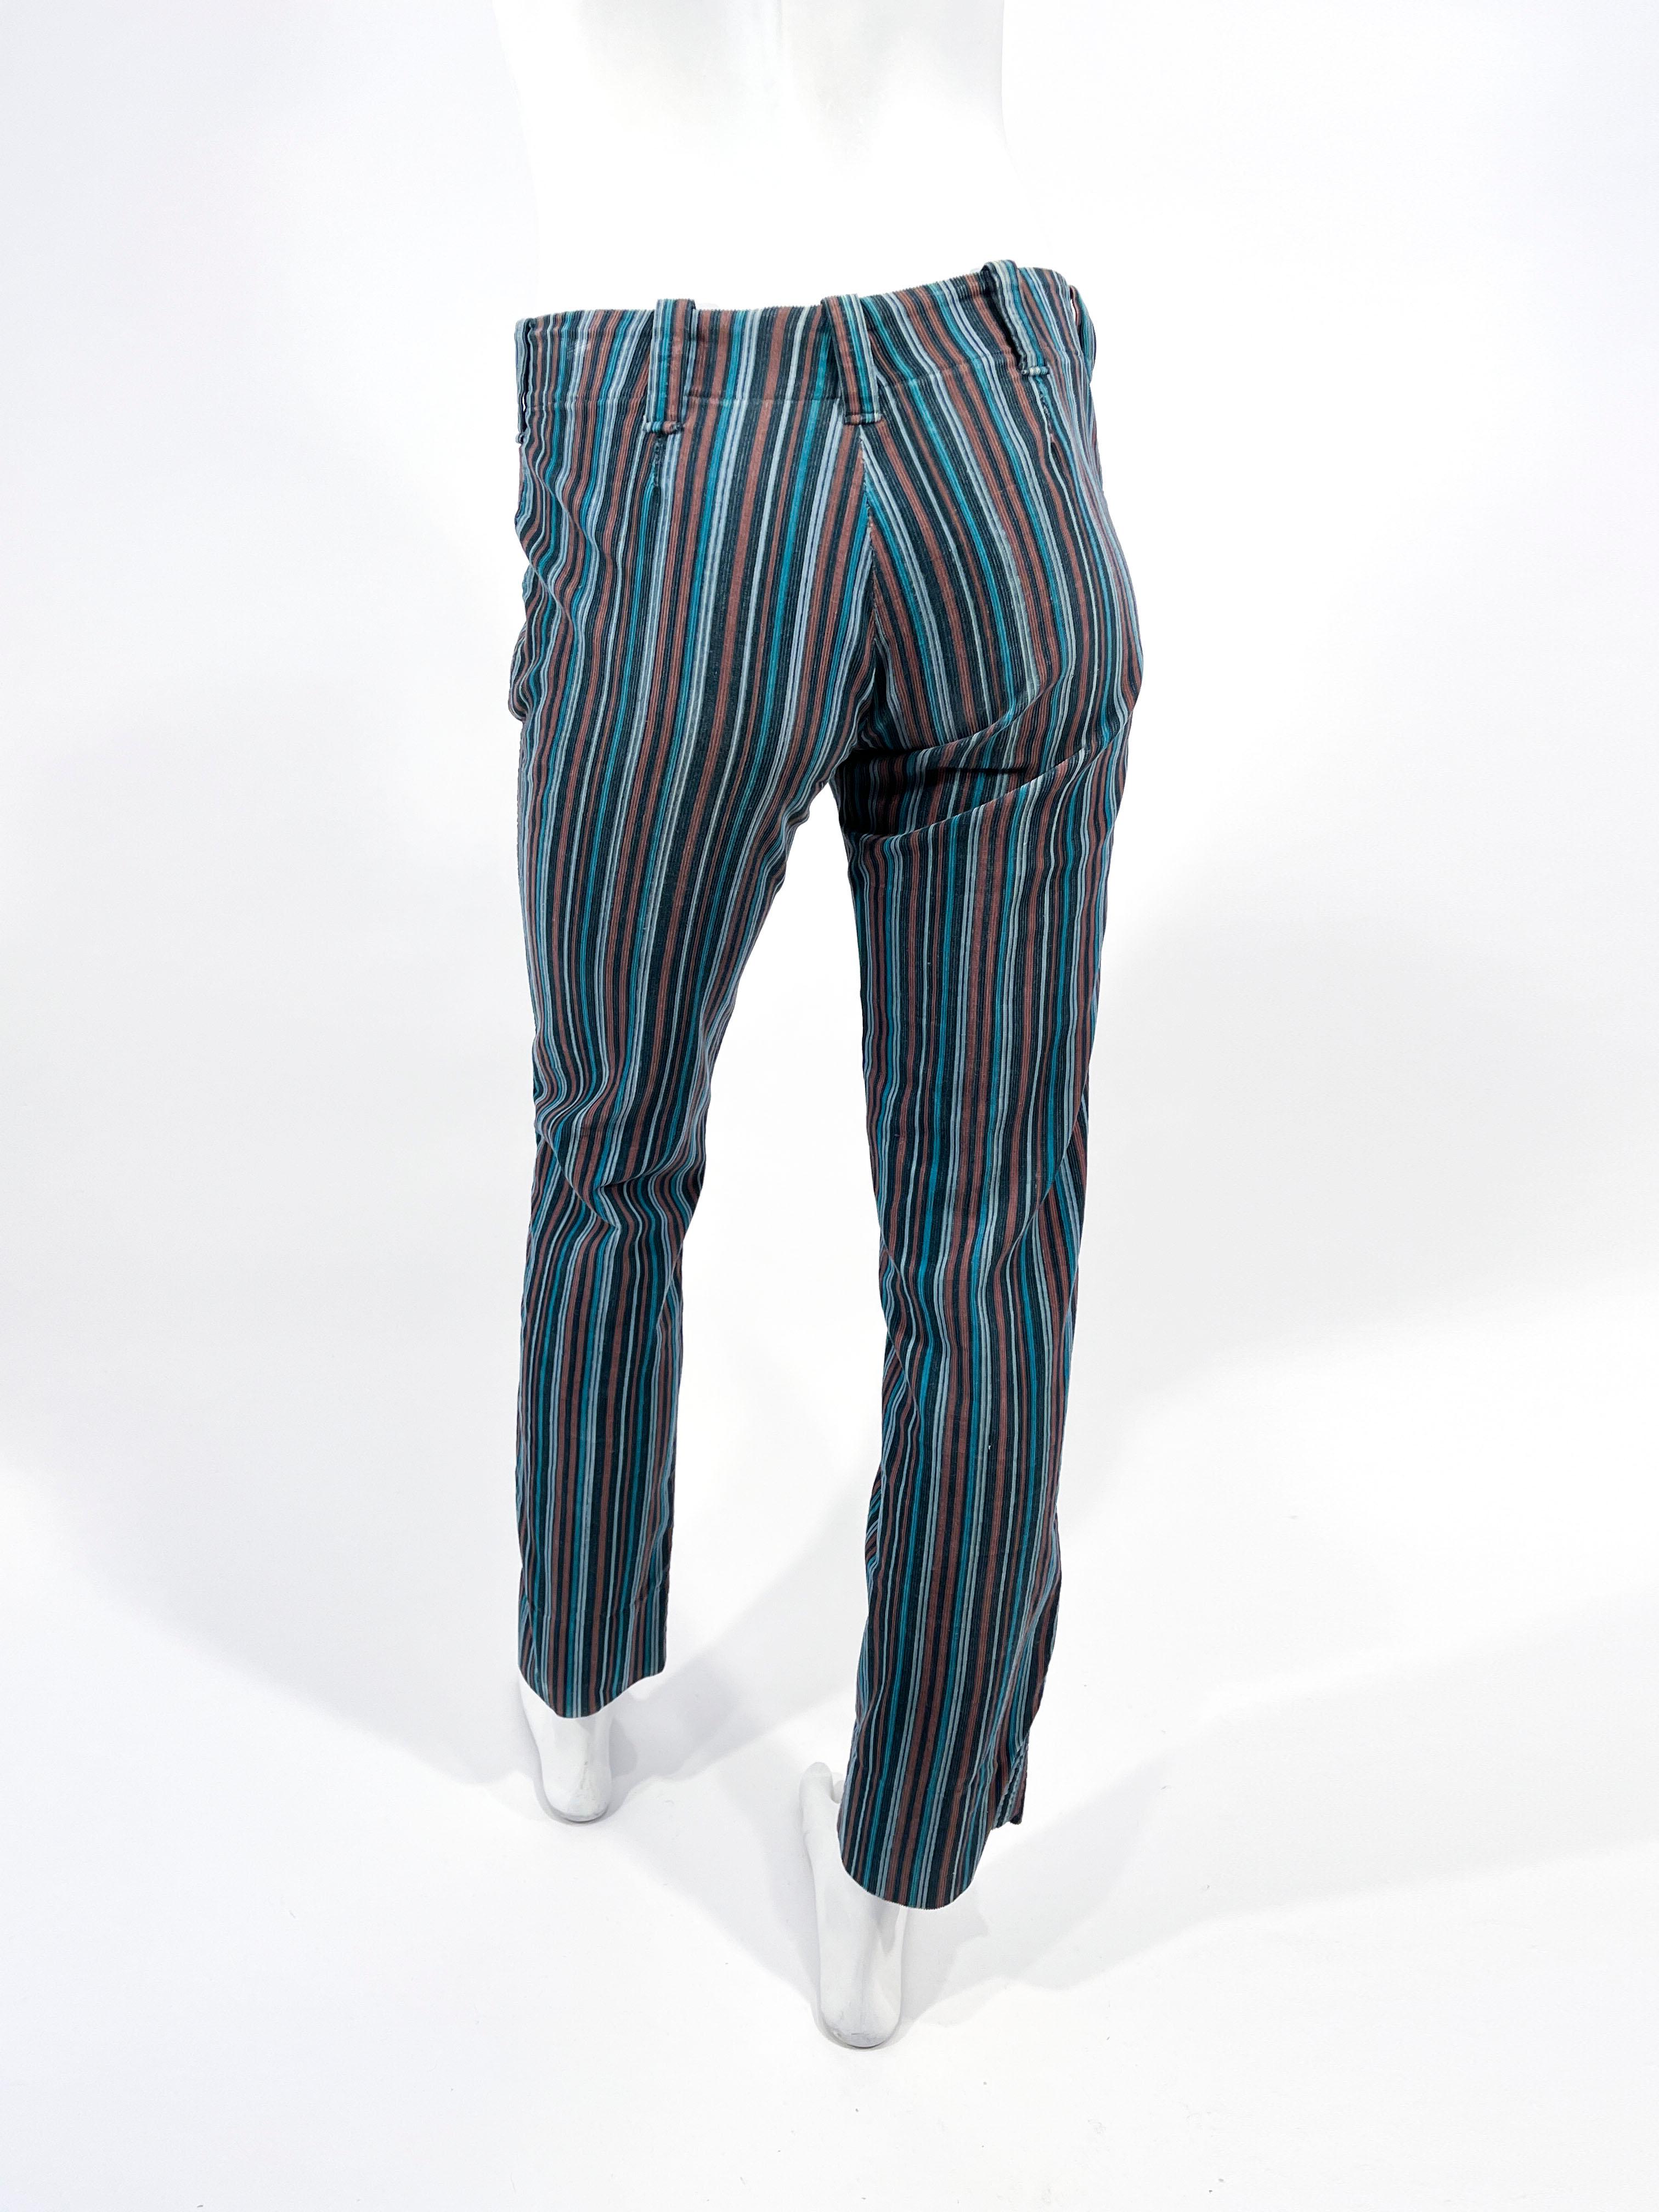 1979 Andrew Yiannakou Corduroy Stripped Pants    For Sale 1